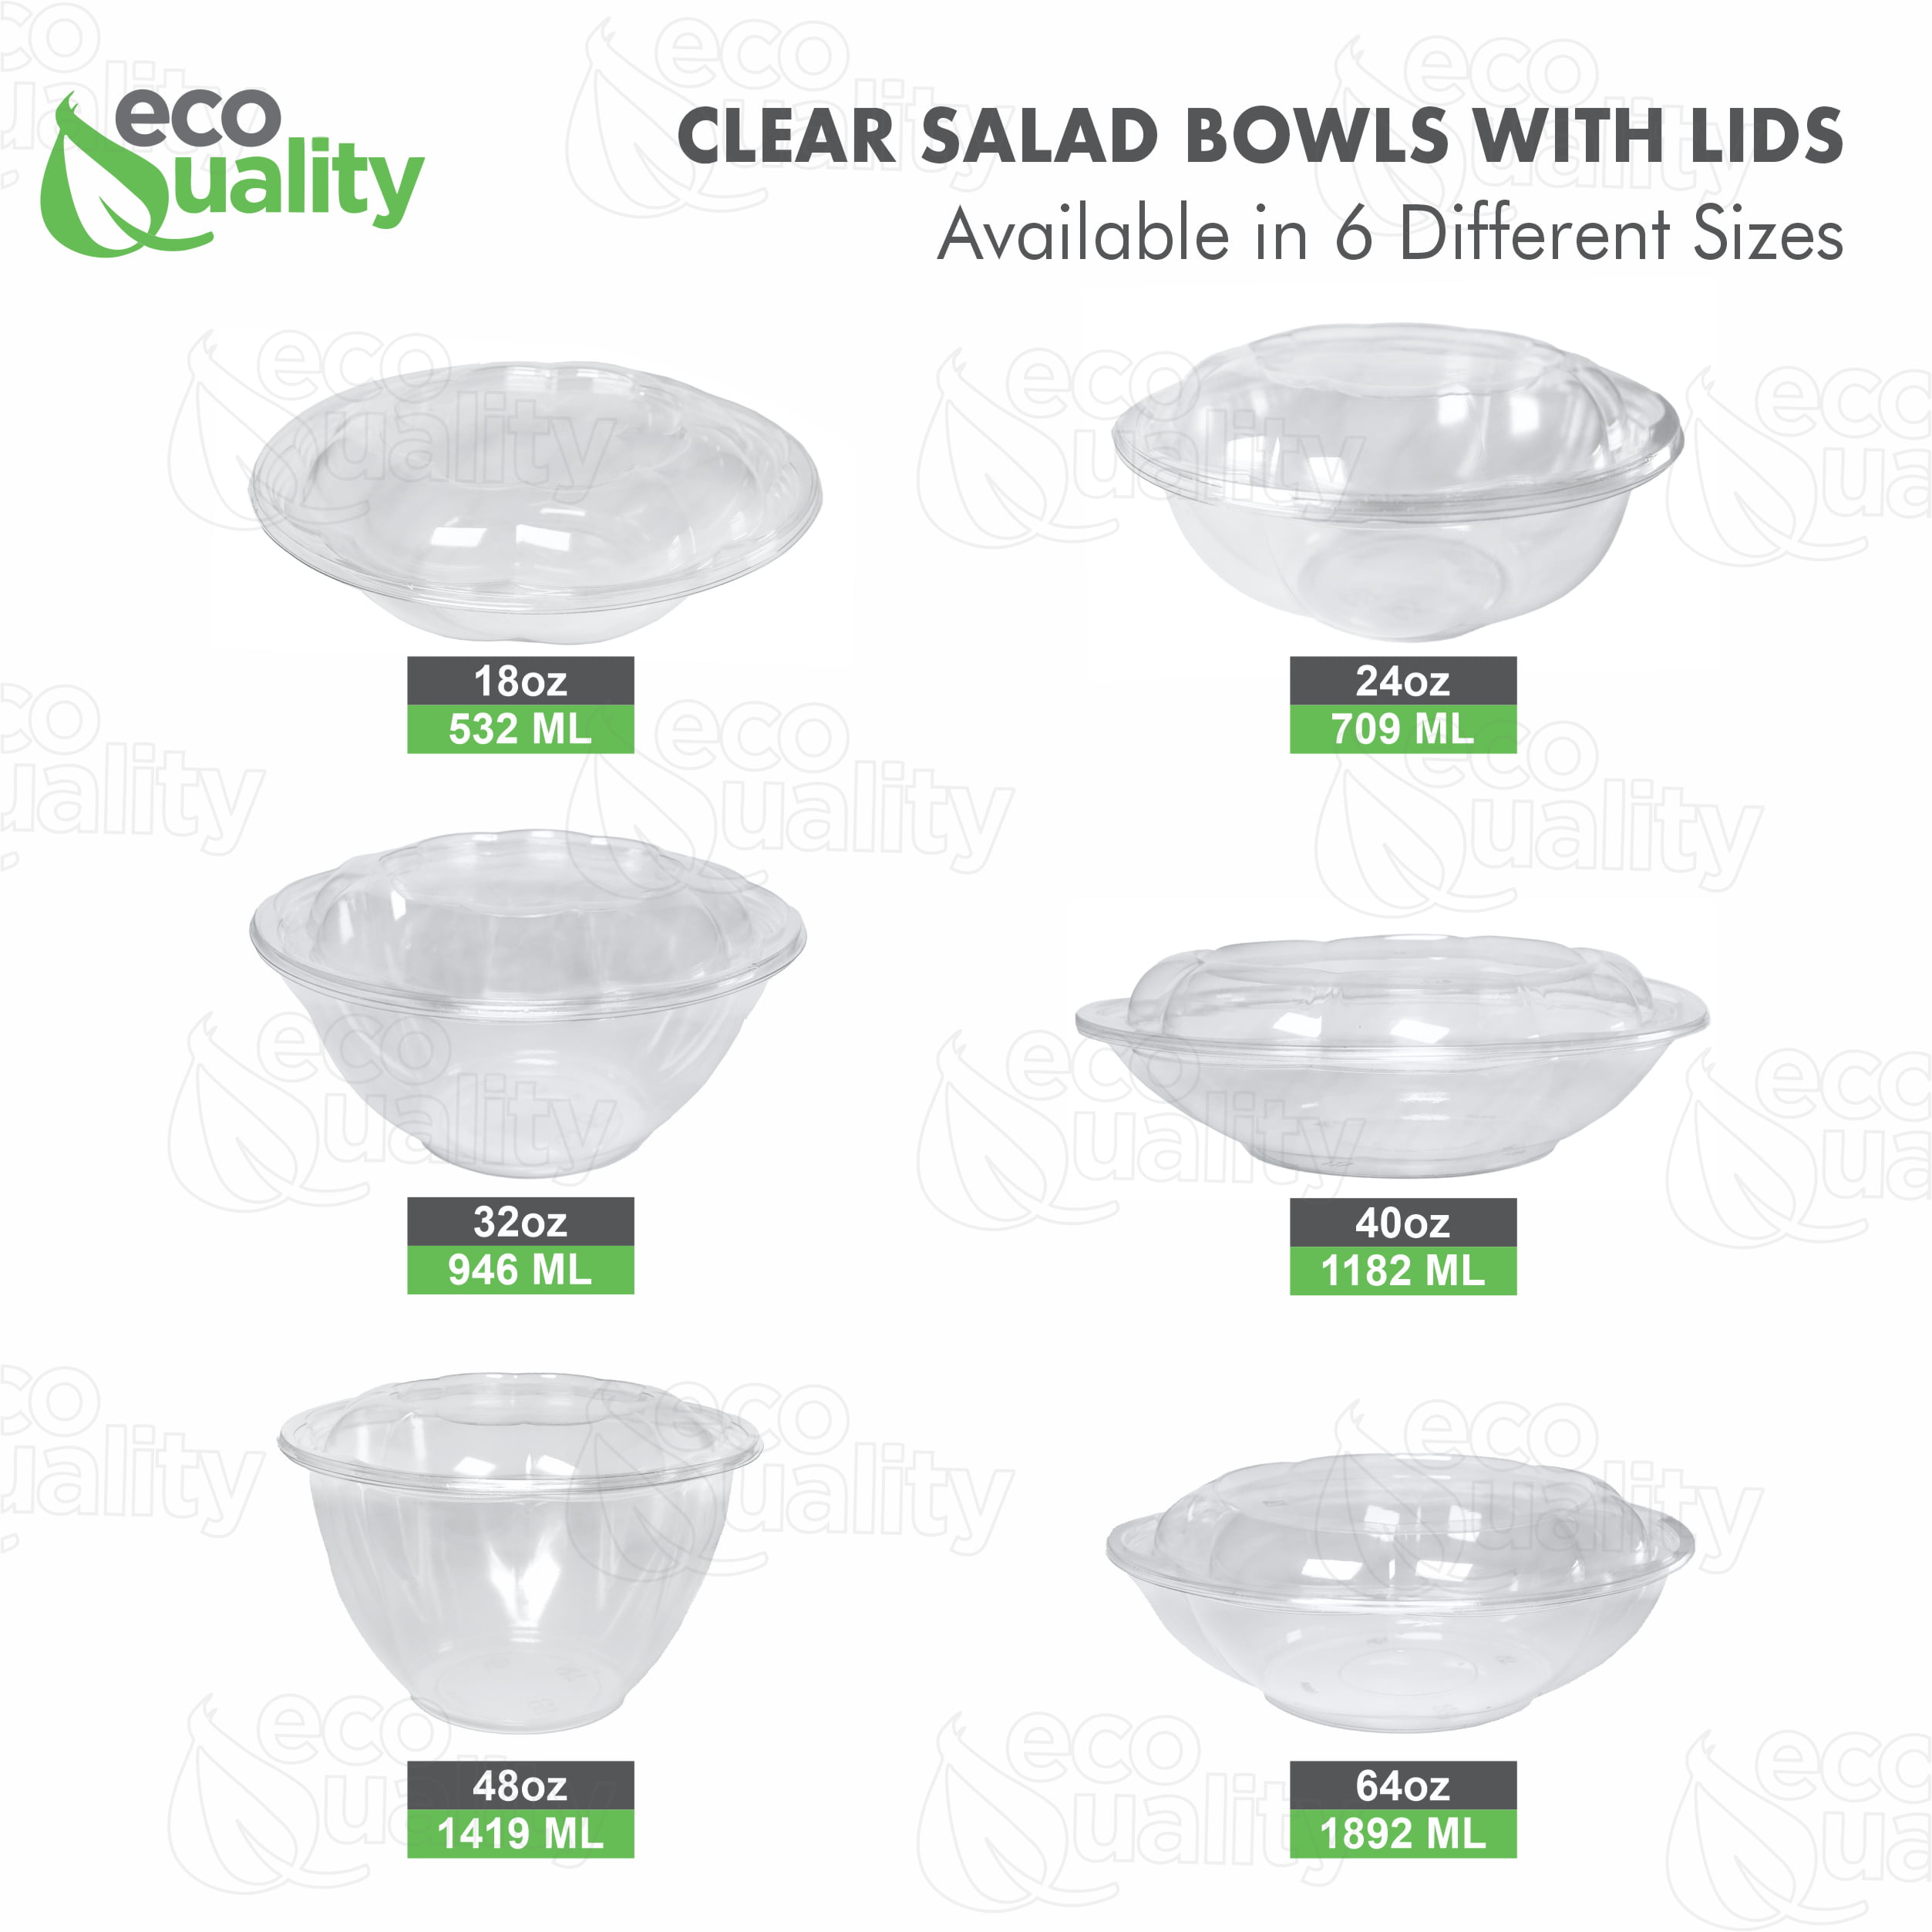 Stock Your Home Plastic Salad Bowls with Lids (10 Count) 64 oz. Disposable  Serving Bowls - Plastic Serving Bowls for Parties - Large Clear